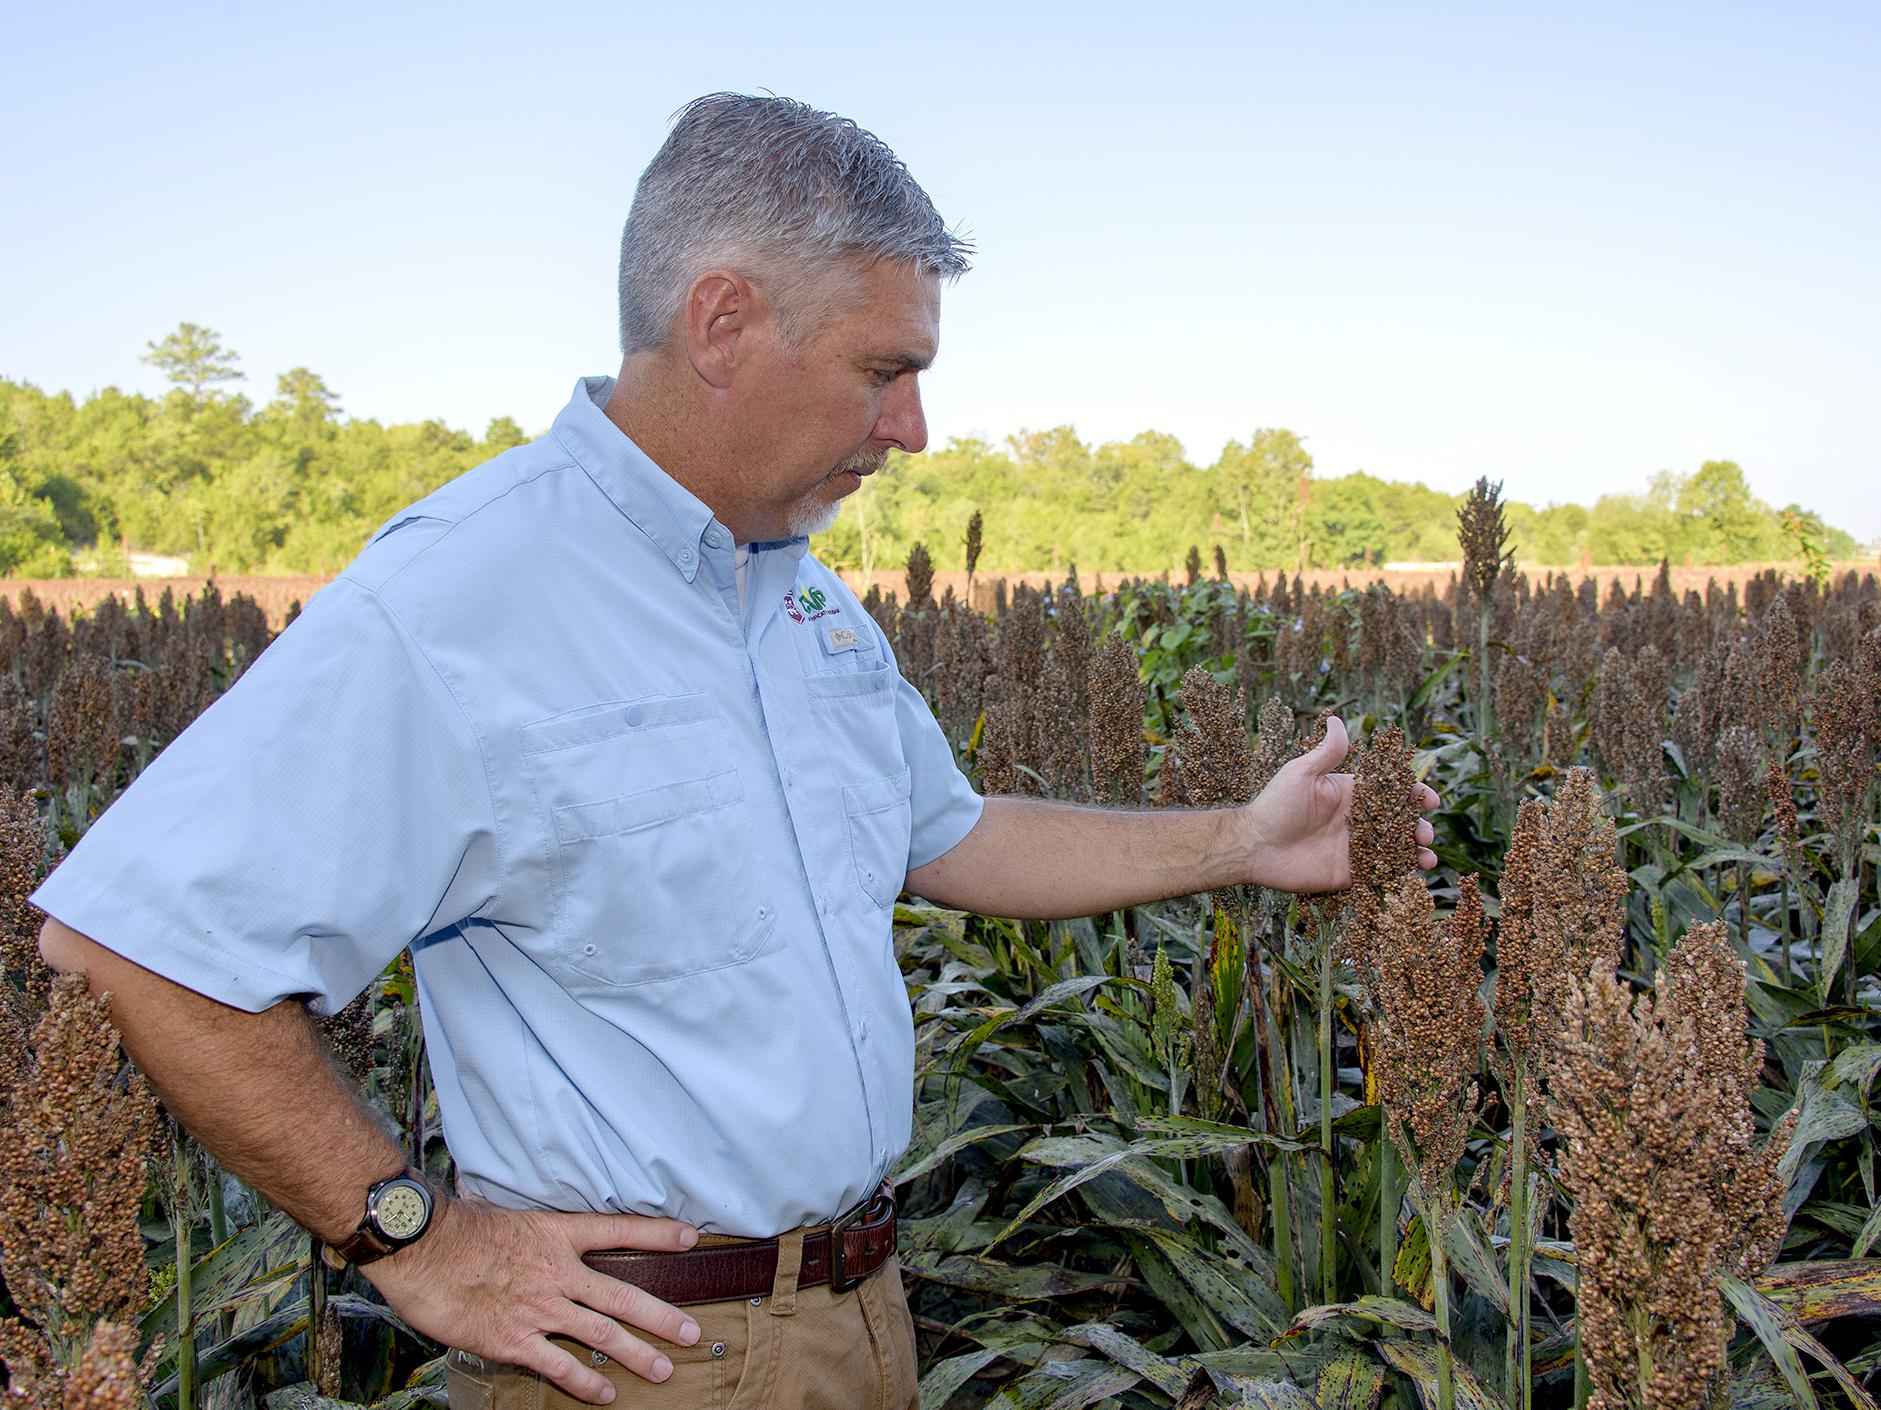 Grain sorghum acreage was low this year because of low prices and sugarcane aphid problems. Mississippi State University Extension Service specialist Erick Larson examined sorghum ready for harvest Sept. 15, 2016, at MSU’s R.R. Foil Plant Science Research Center in Starkville, Mississippi. (Photo by MSU Extension Service/Kevin Hudson)